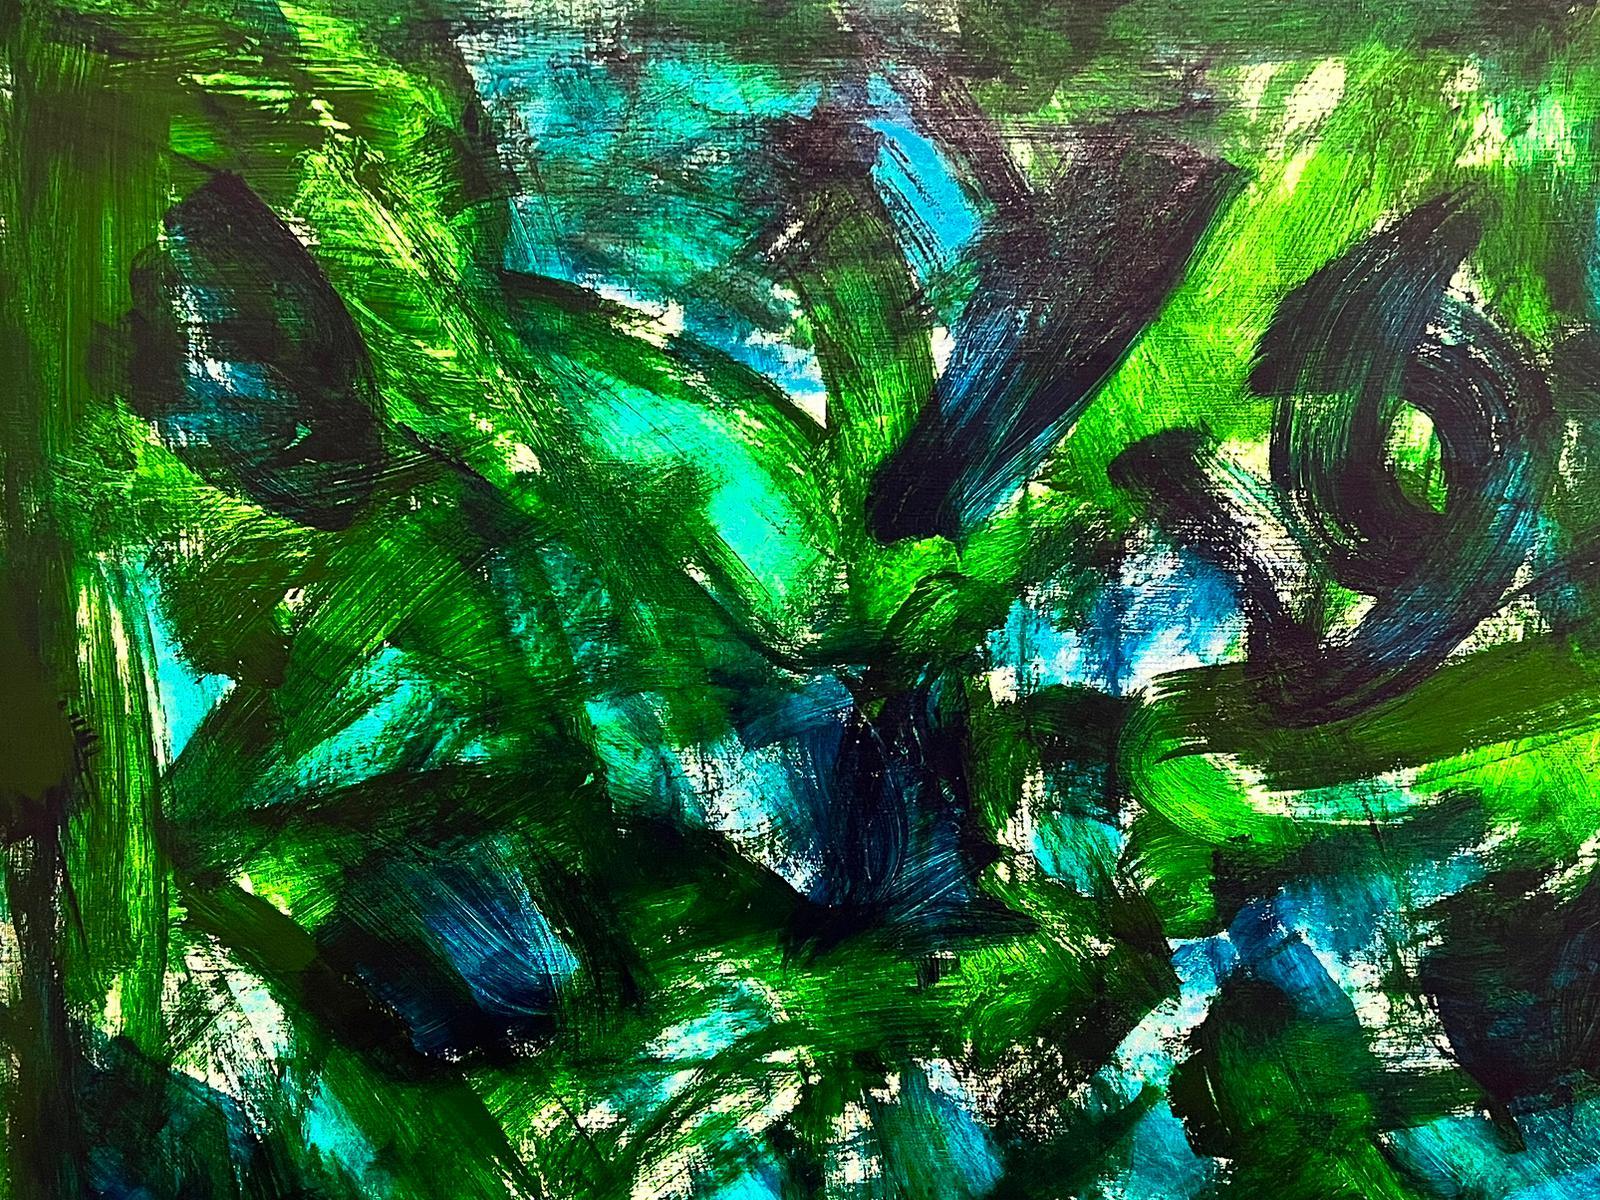 CONTEMPORARY BRITISH ABSTRACT HUGE PAINTING - Green and Blues - Abstract Expressionist Painting by Sally Bradshaw